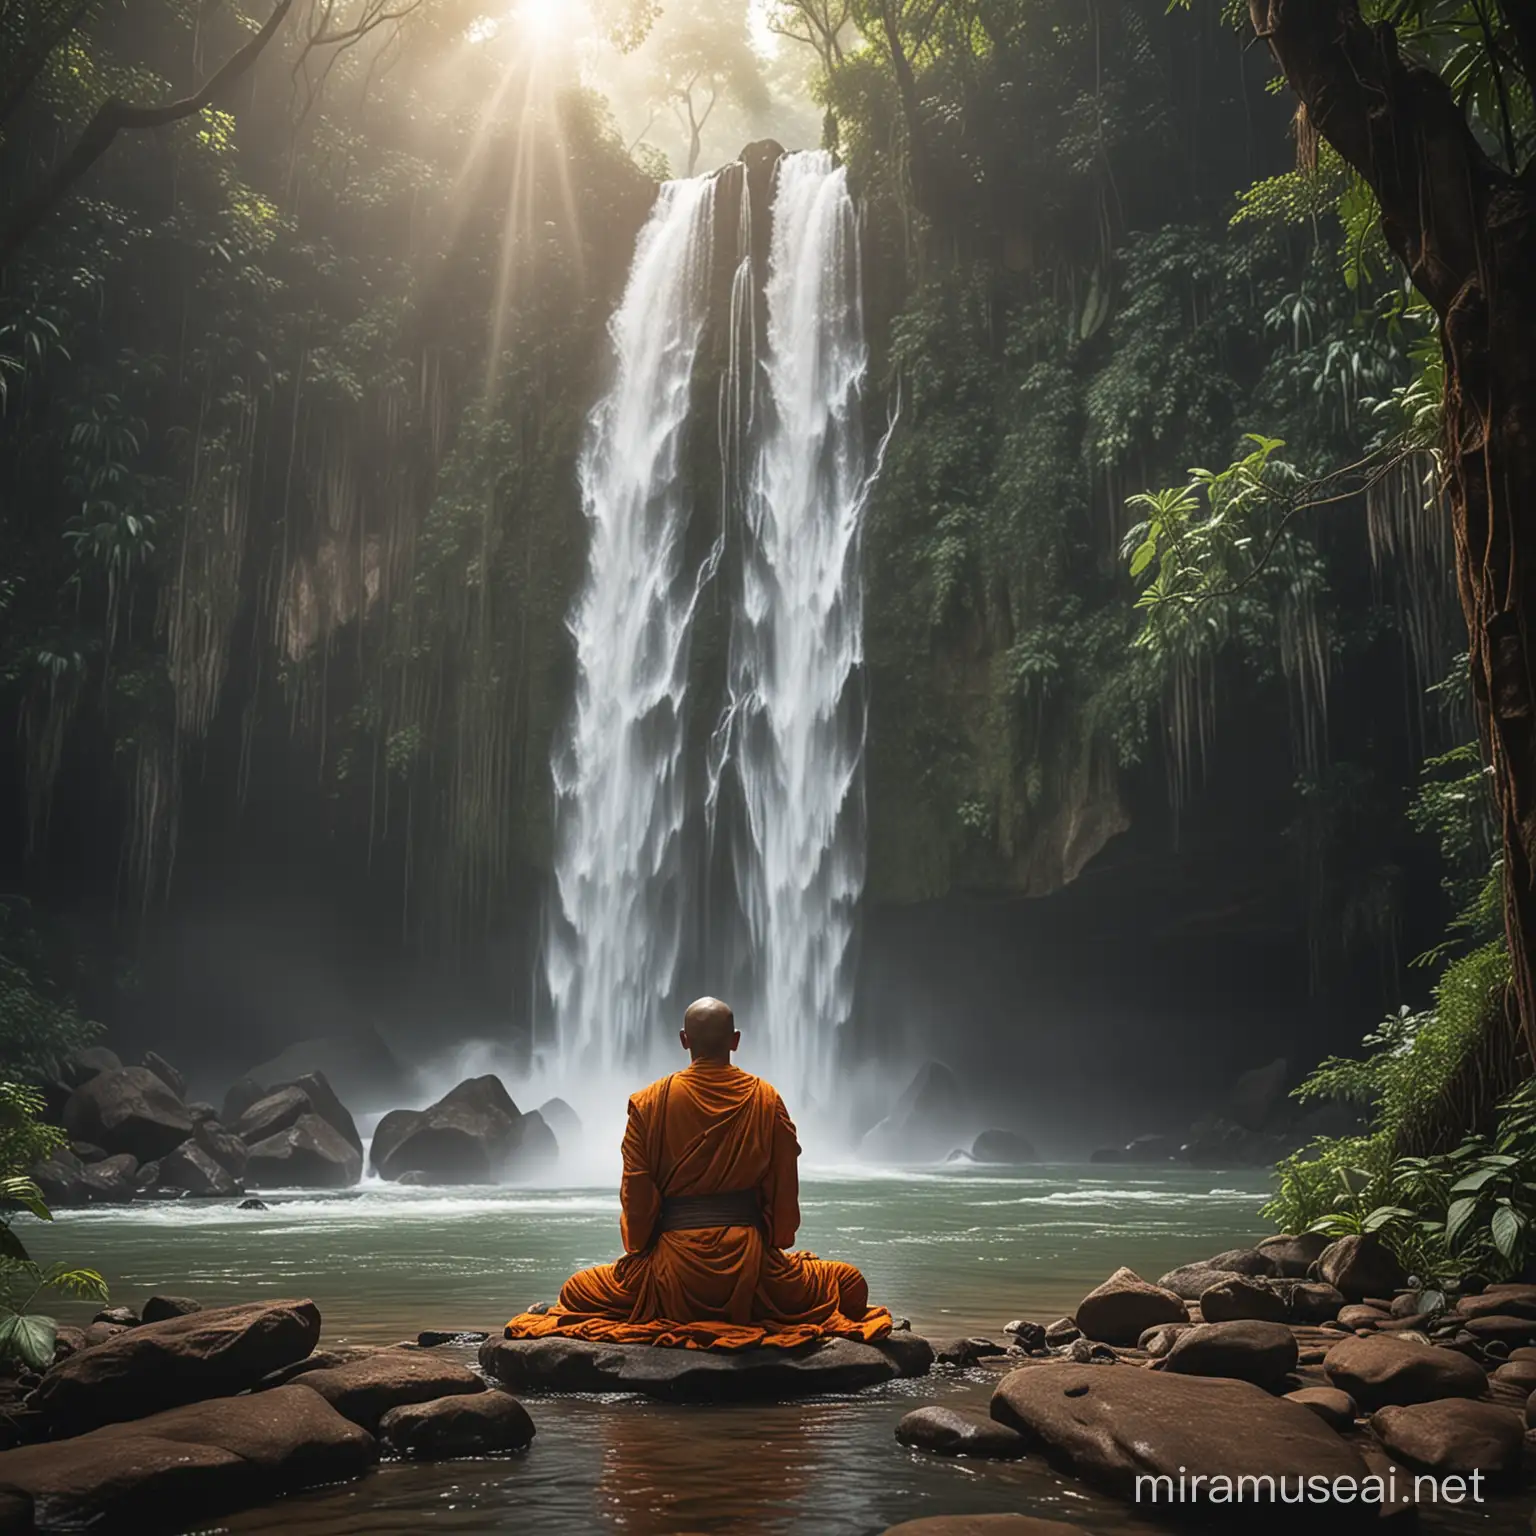 Meditating Monk in Jungle with Waterfall and Spiritual Aura